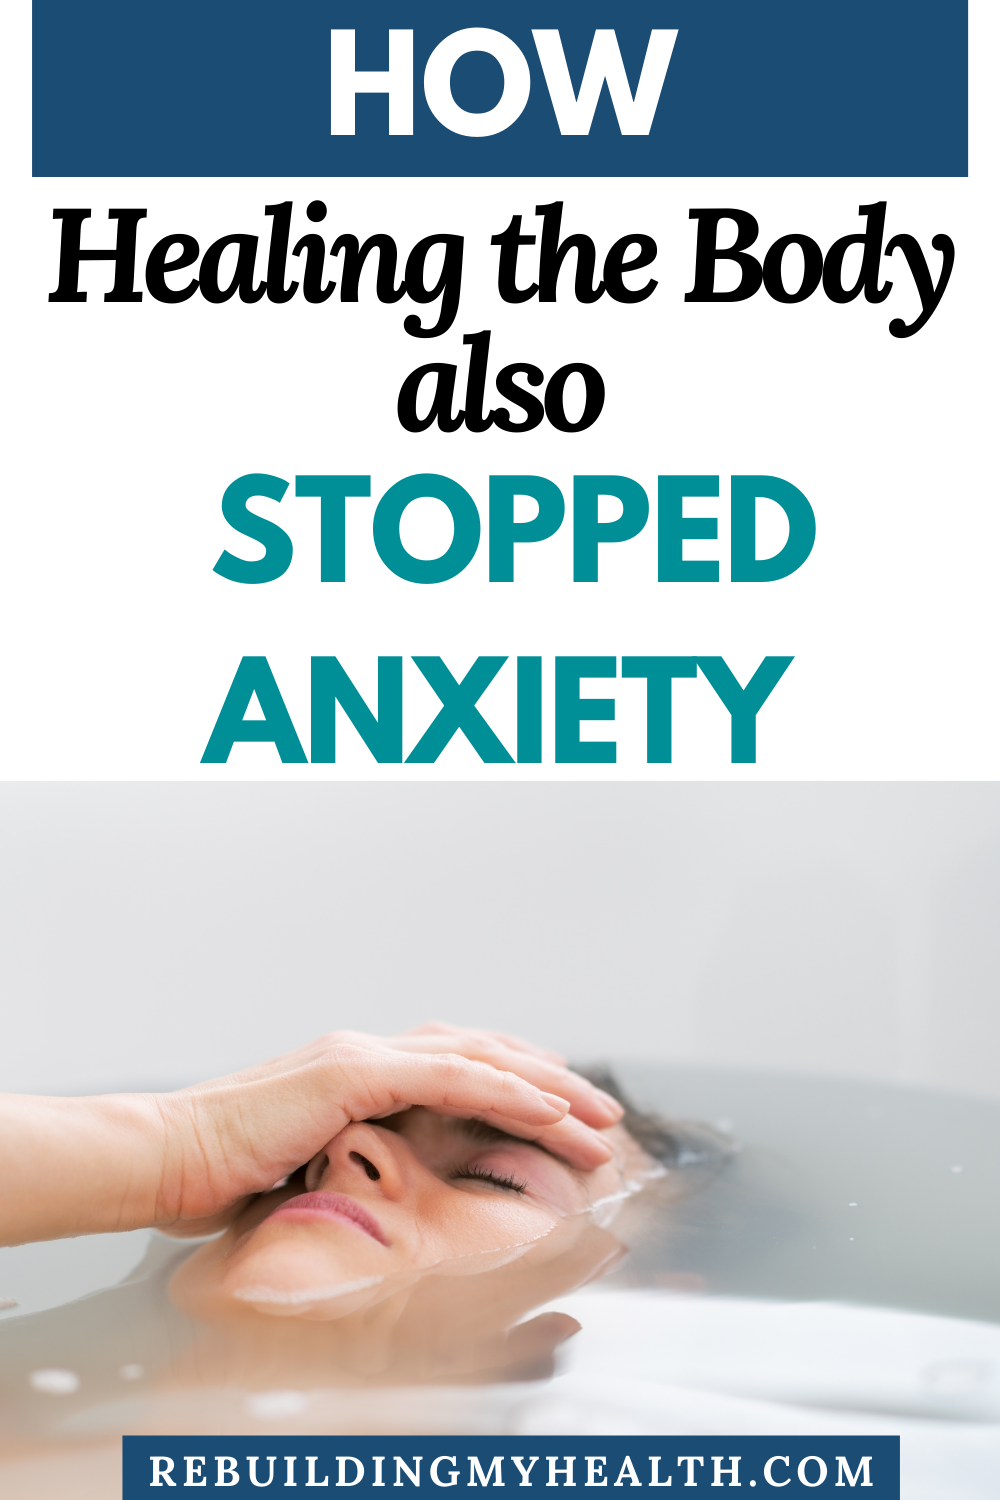 Angela treated the physical causes of anxiety, including adrenal fatigue, elevated thyroid antibodies, mold toxicity and stress, and found anxiety relief.